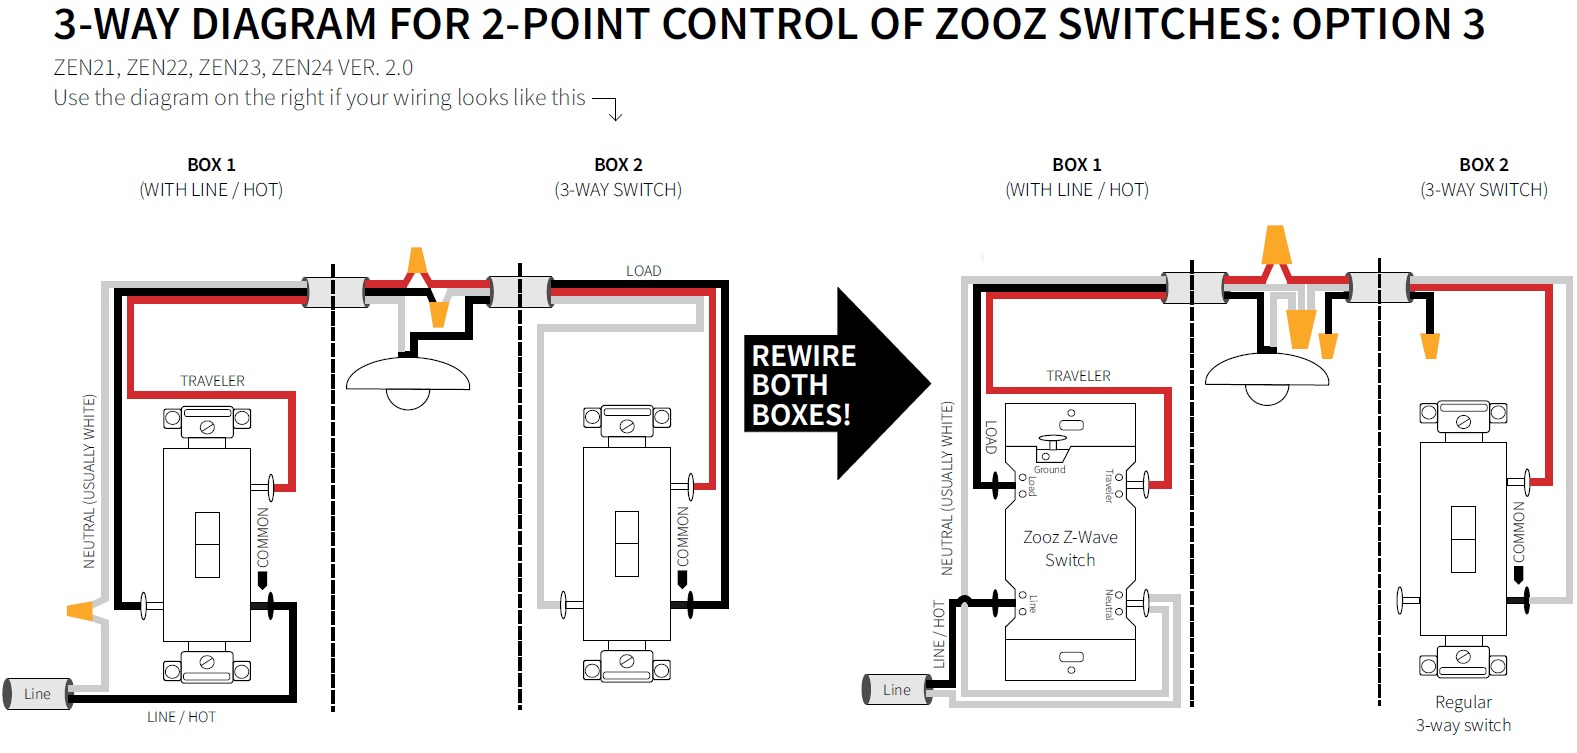 How To Wire Your Zooz Switch In A 3-Way Configuration - Zooz - Wiring Diagram For 3 Way Switch